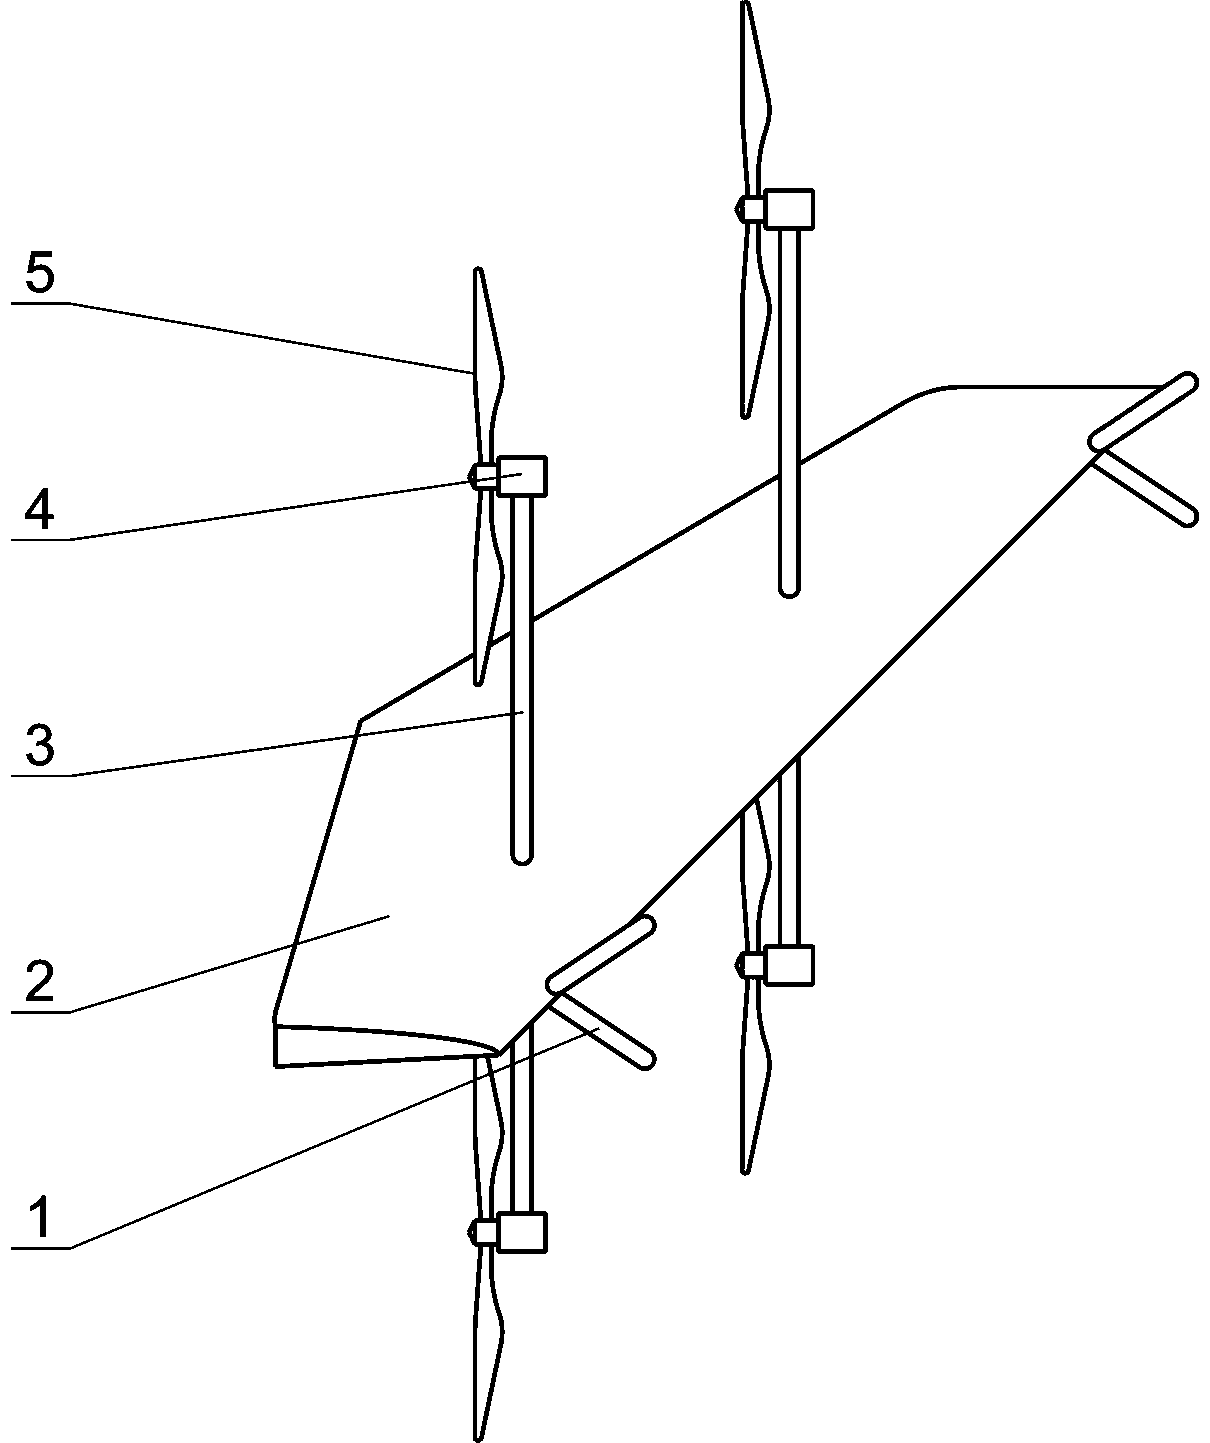 Fixed-wing aircraft capable of vertically taking off and landing